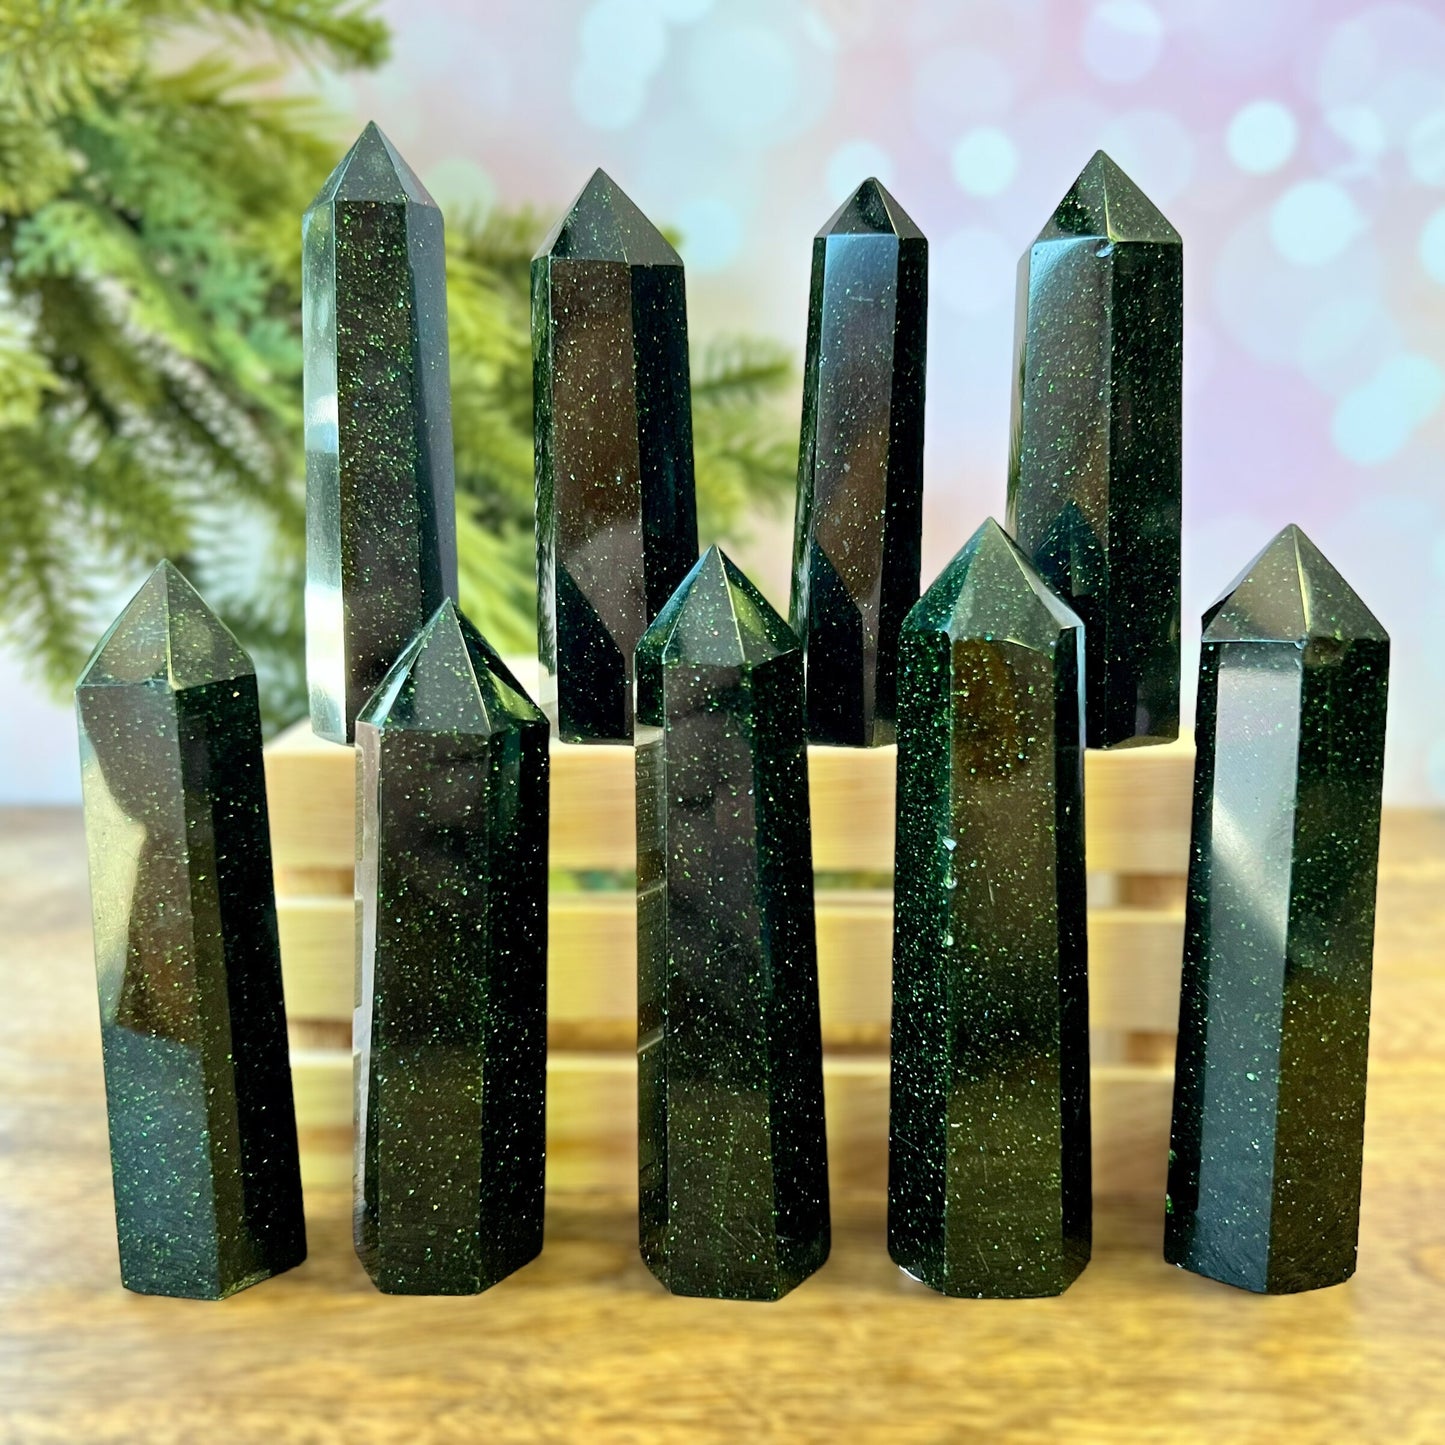 Green Goldstone Crystal Tower - You get one